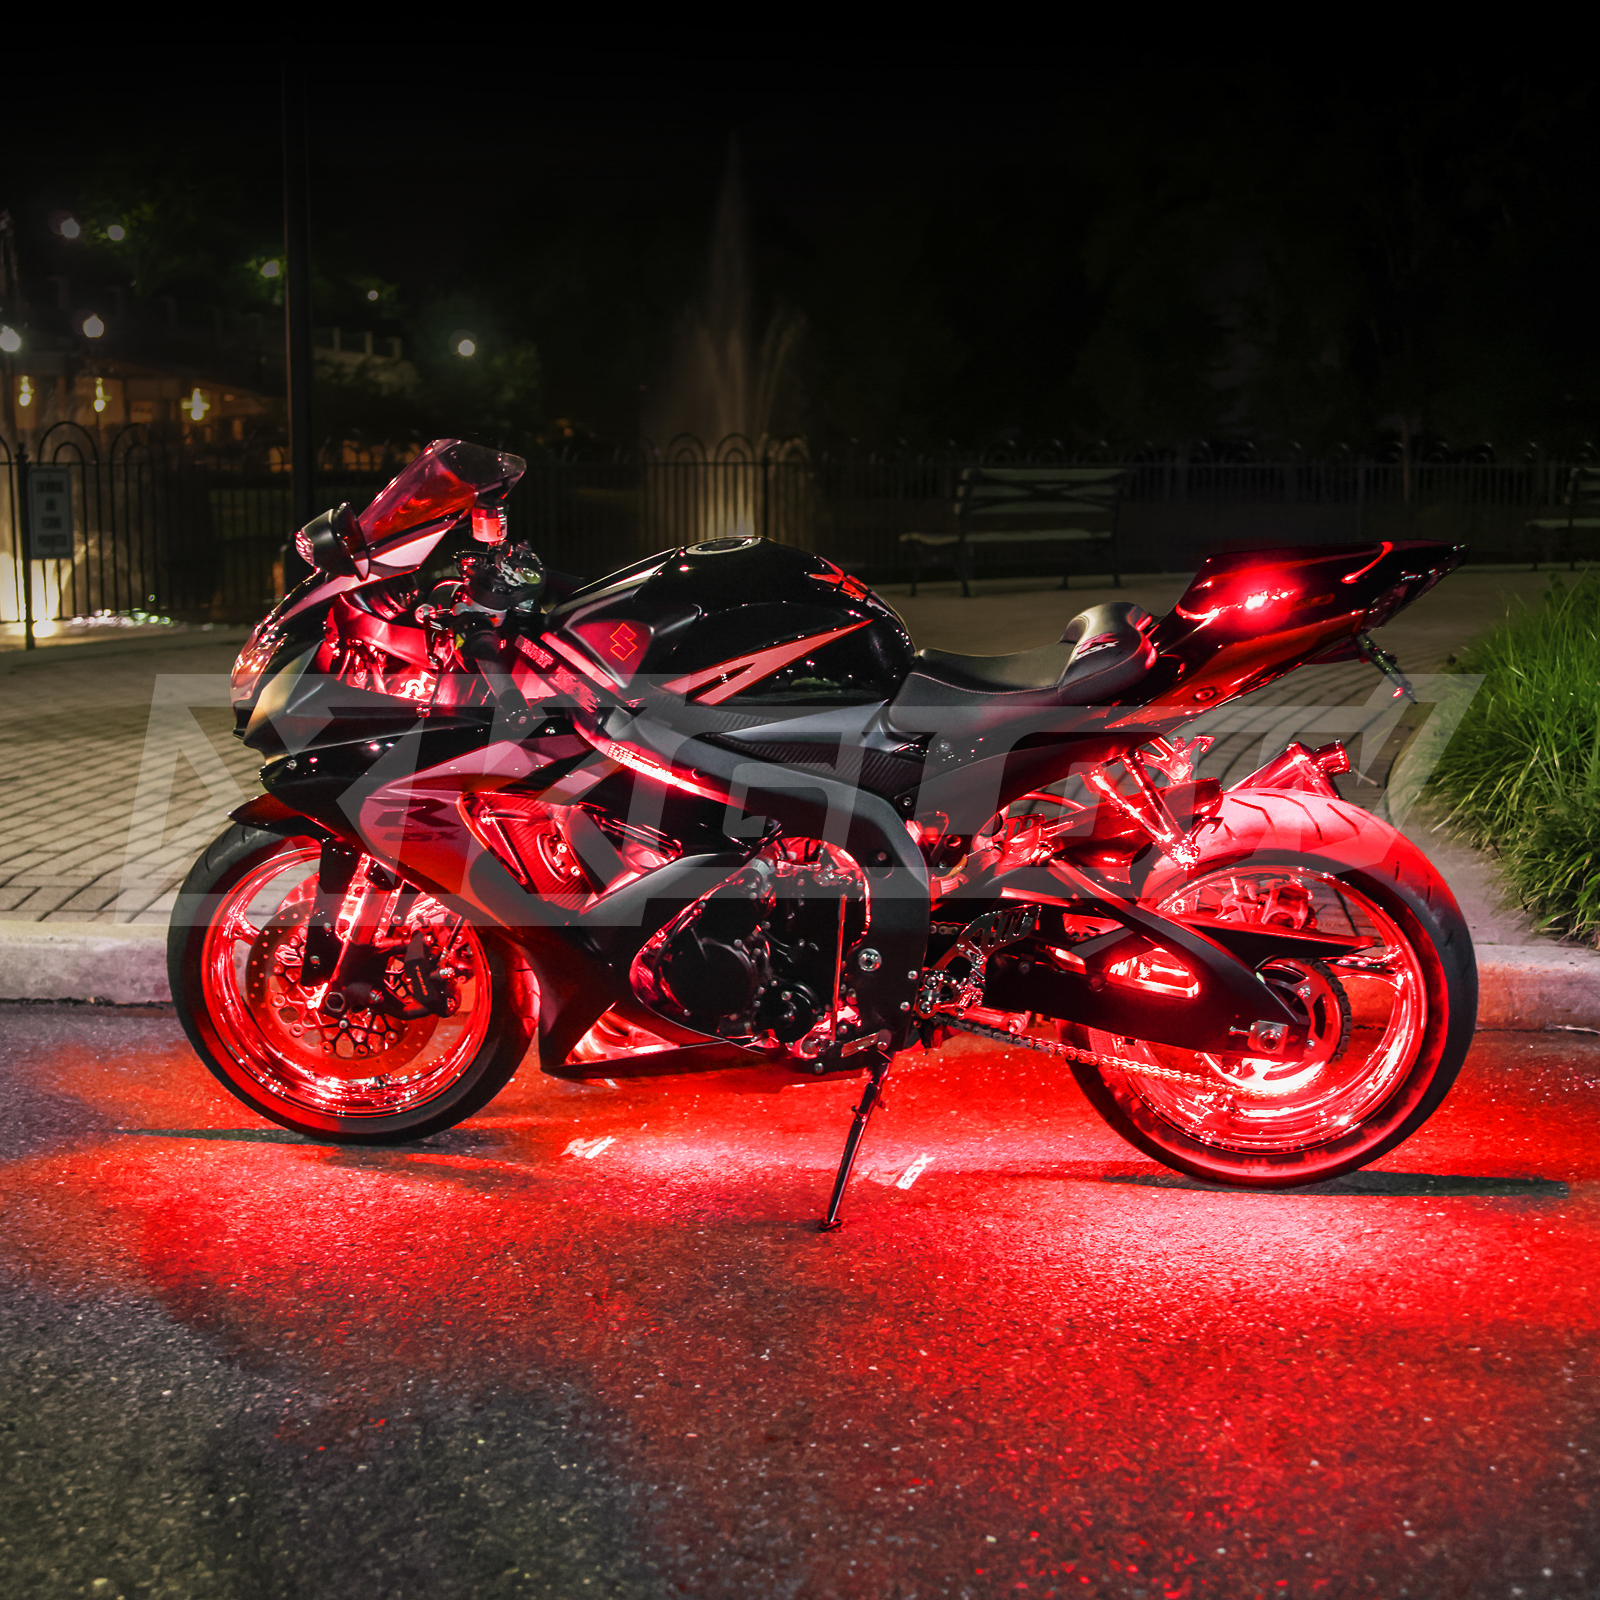 Geeon 2pcs 8inch Red LED Light Strip for Motorcycle 12V Super Bright